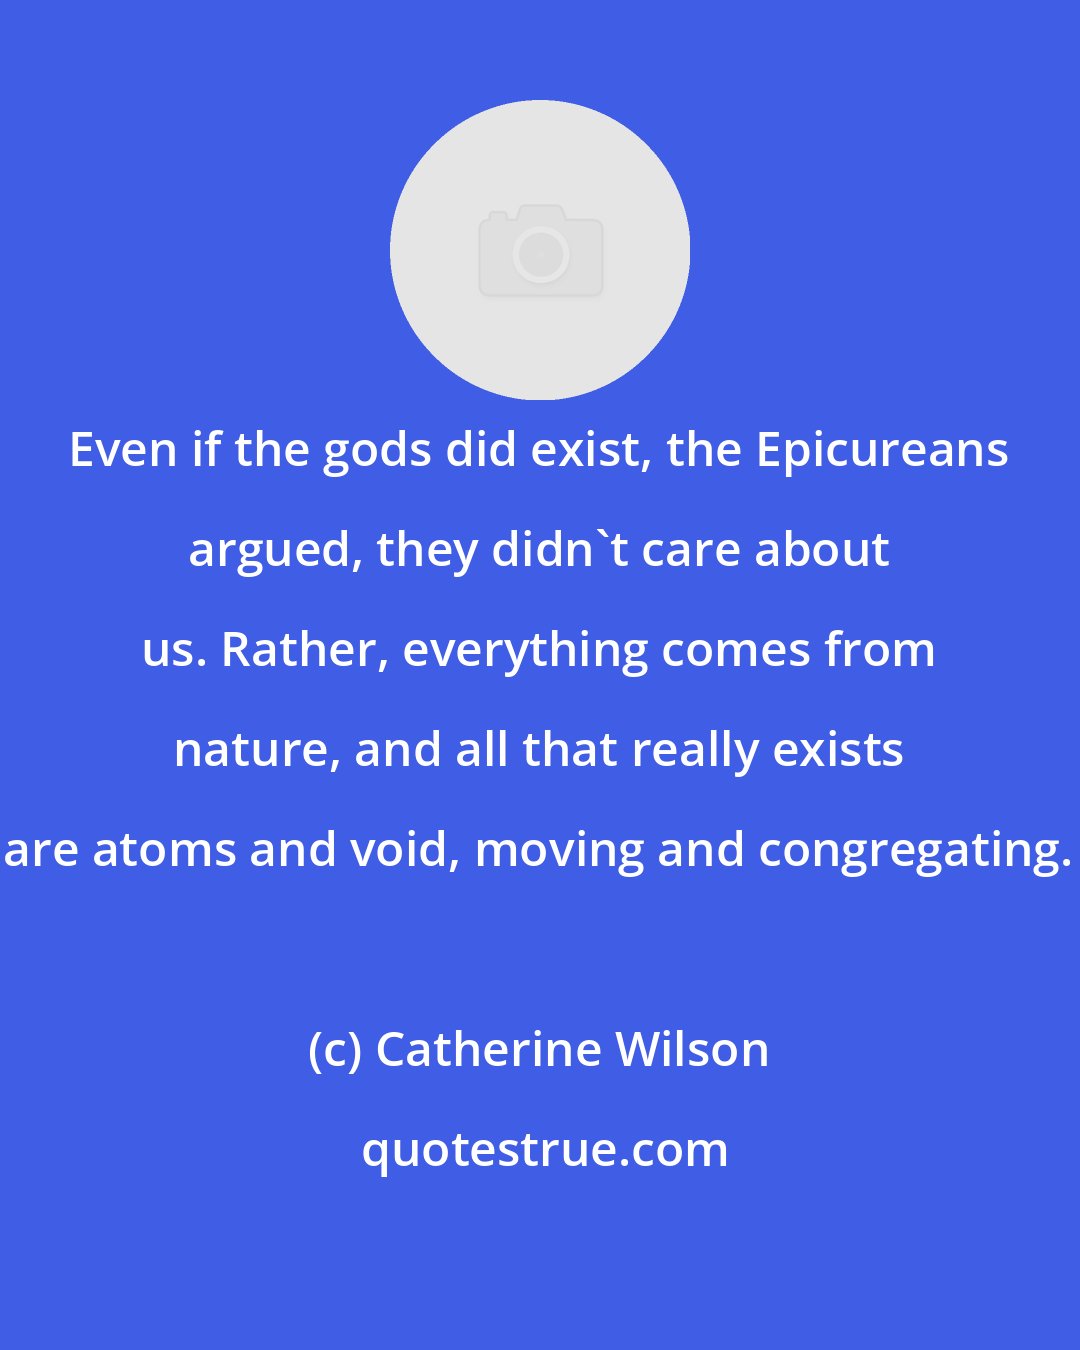 Catherine Wilson: Even if the gods did exist, the Epicureans argued, they didn't care about us. Rather, everything comes from nature, and all that really exists are atoms and void, moving and congregating.